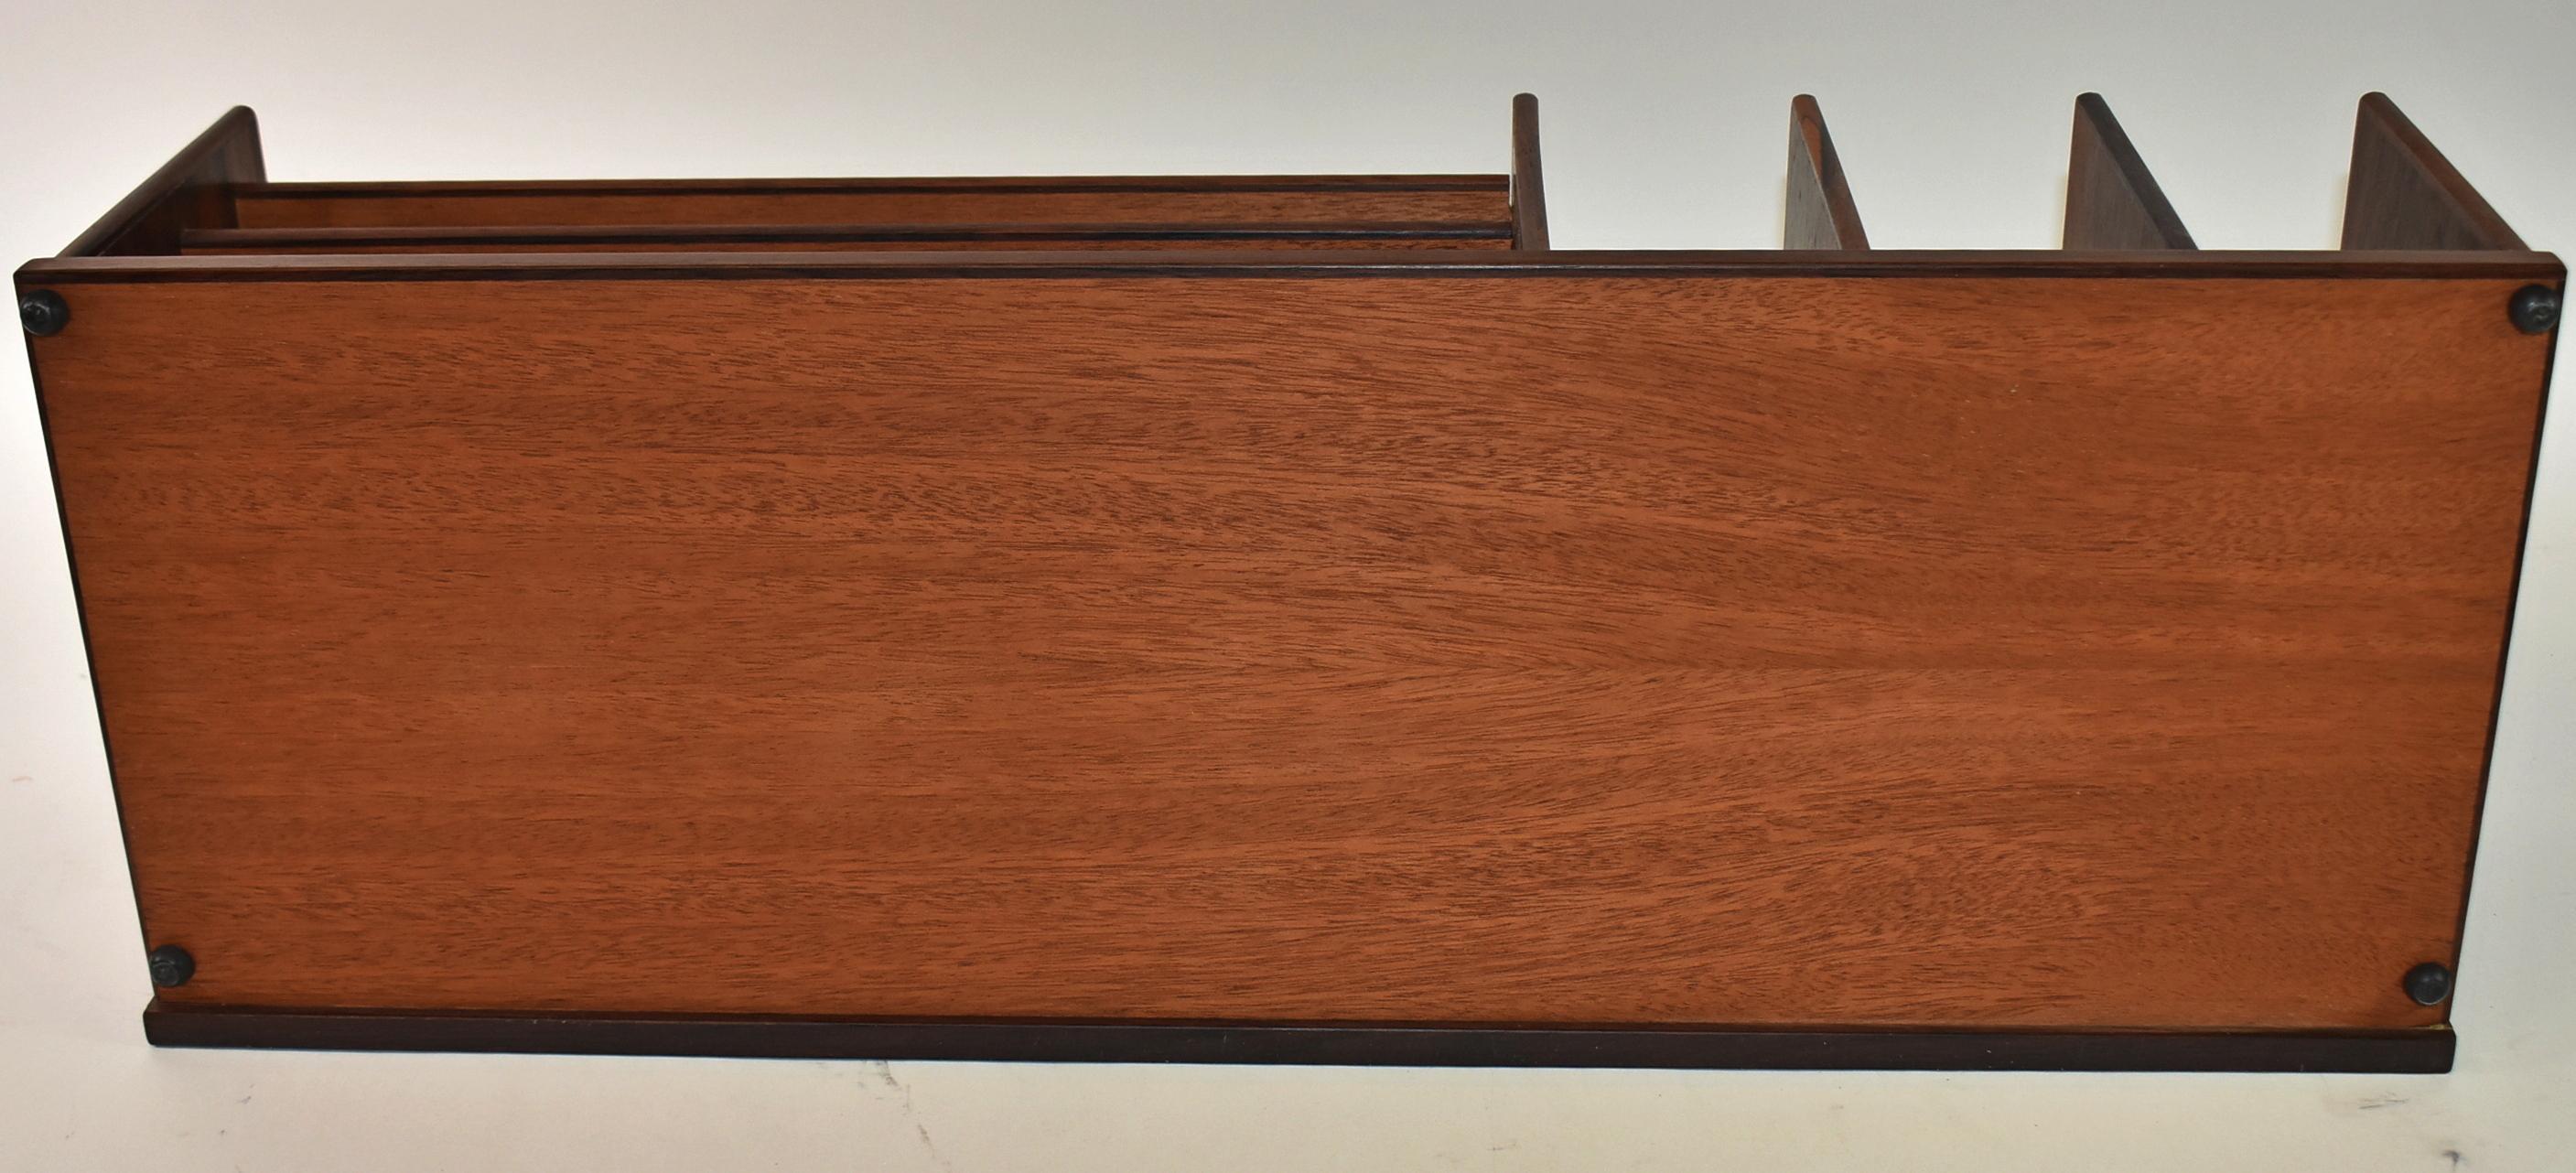 Danish Rosewood Desk Top Organizer by George Petersen In Good Condition For Sale In Toledo, OH